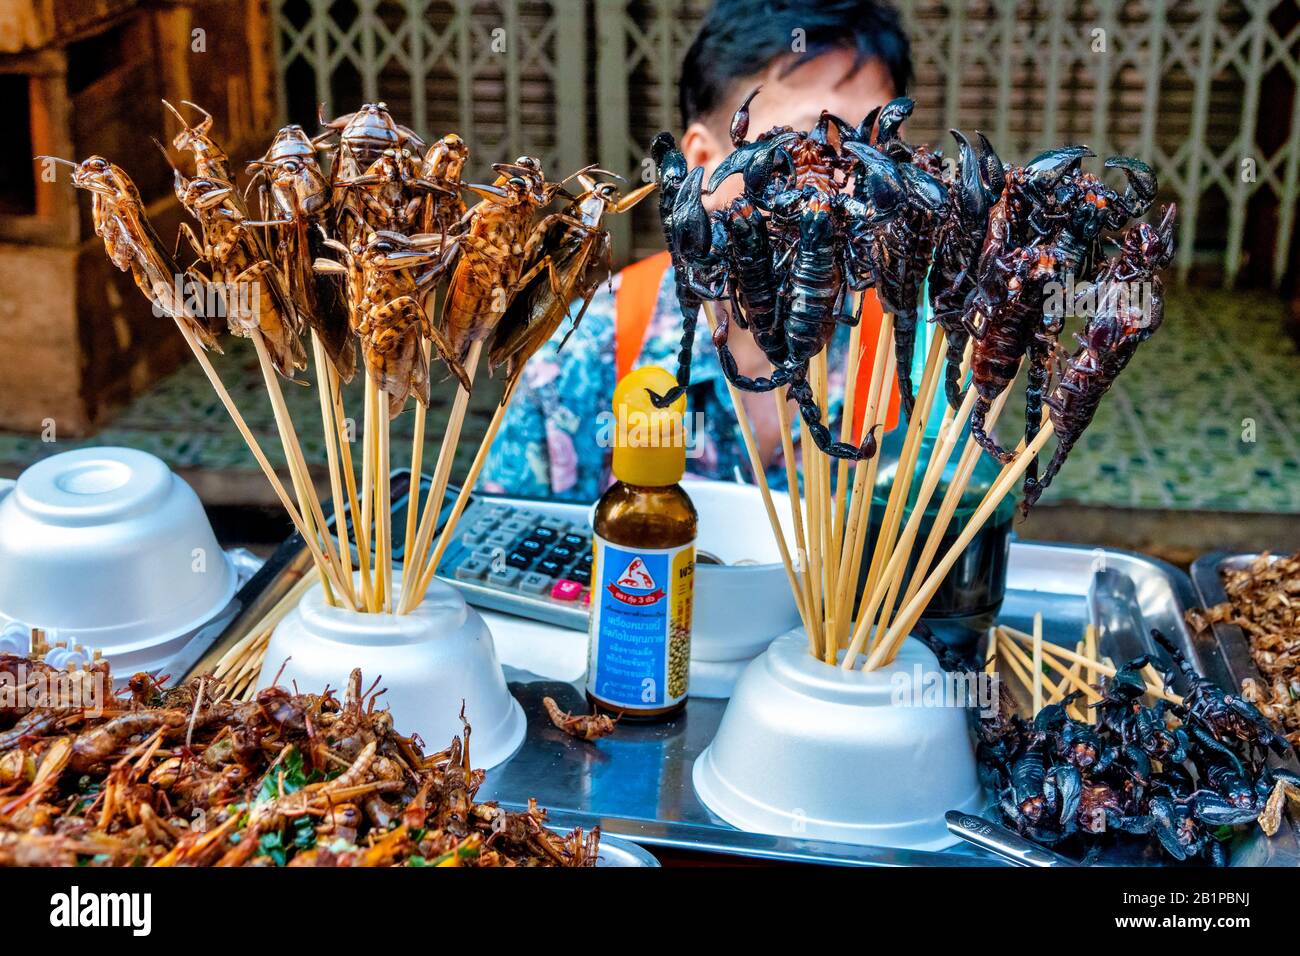 Woman selling insects in the Talat Kao Old Market in Soi 6 of Yaowarat Road, Bangkok, Thailand Stock Photo